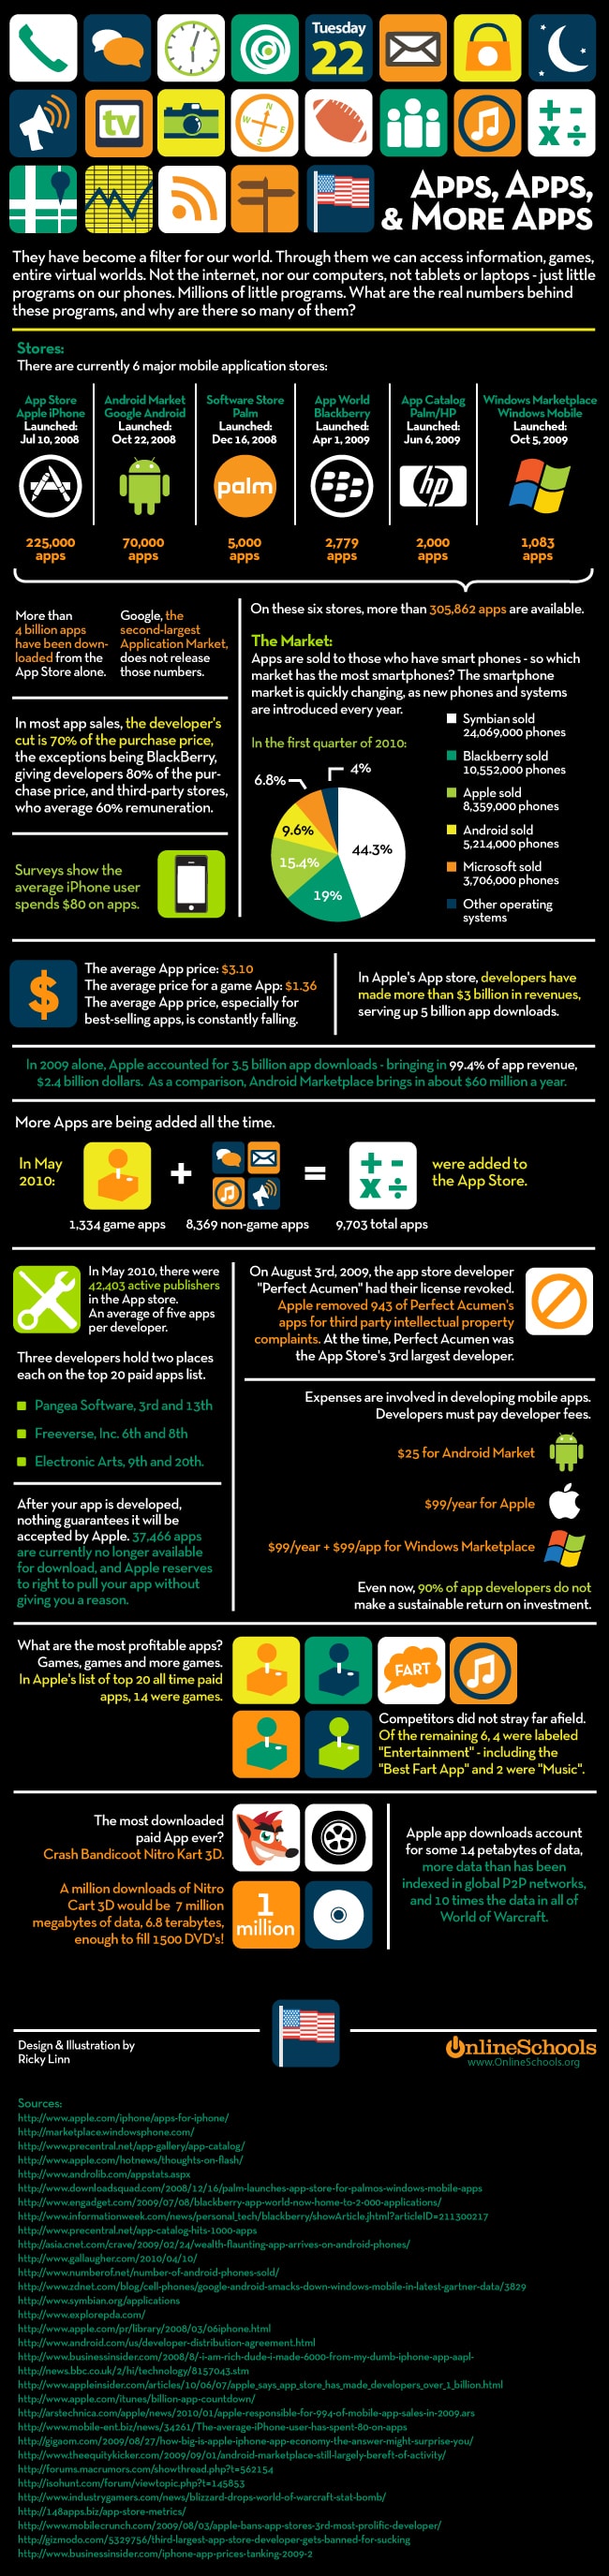 6 Major App Stores Compared [Infographic]